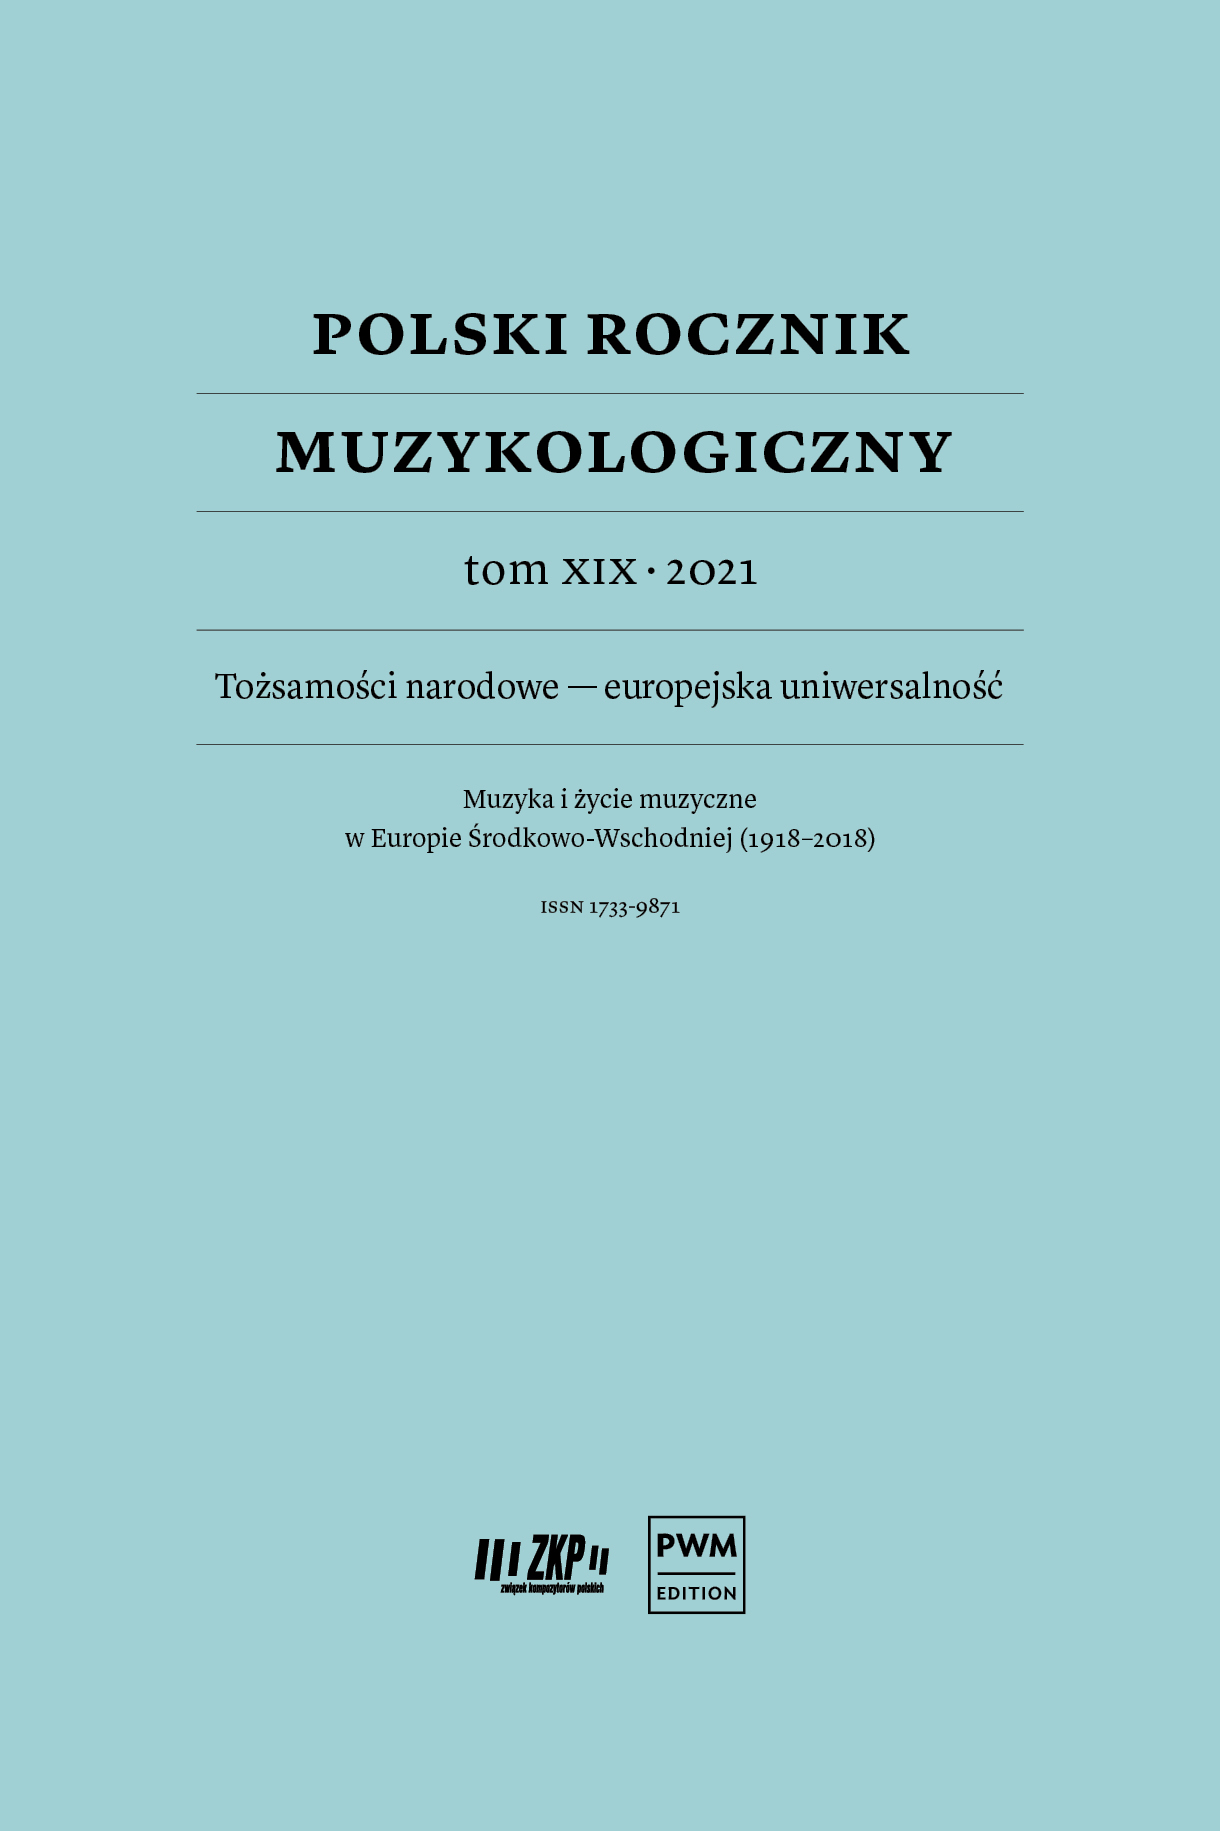 Polish Musicological Yearbook – vol. 19 – cover